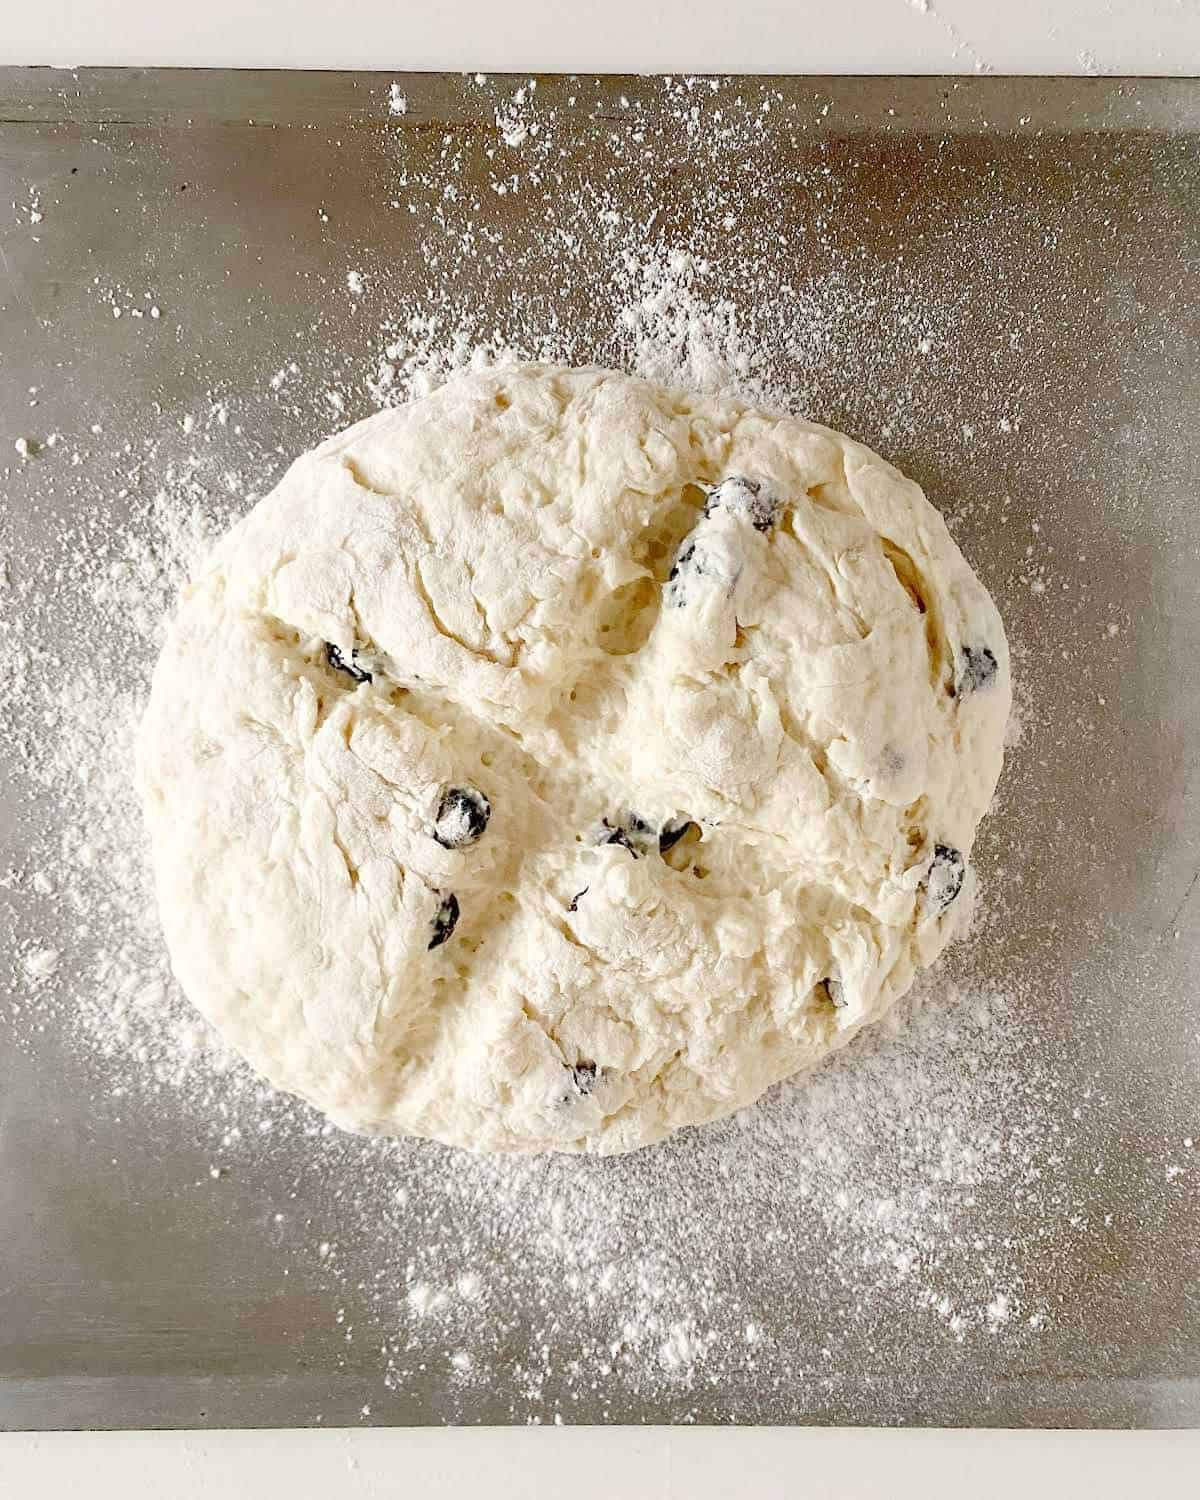 Unbaked round of raisin bread dough with a cross on top on a metal baking sheet.